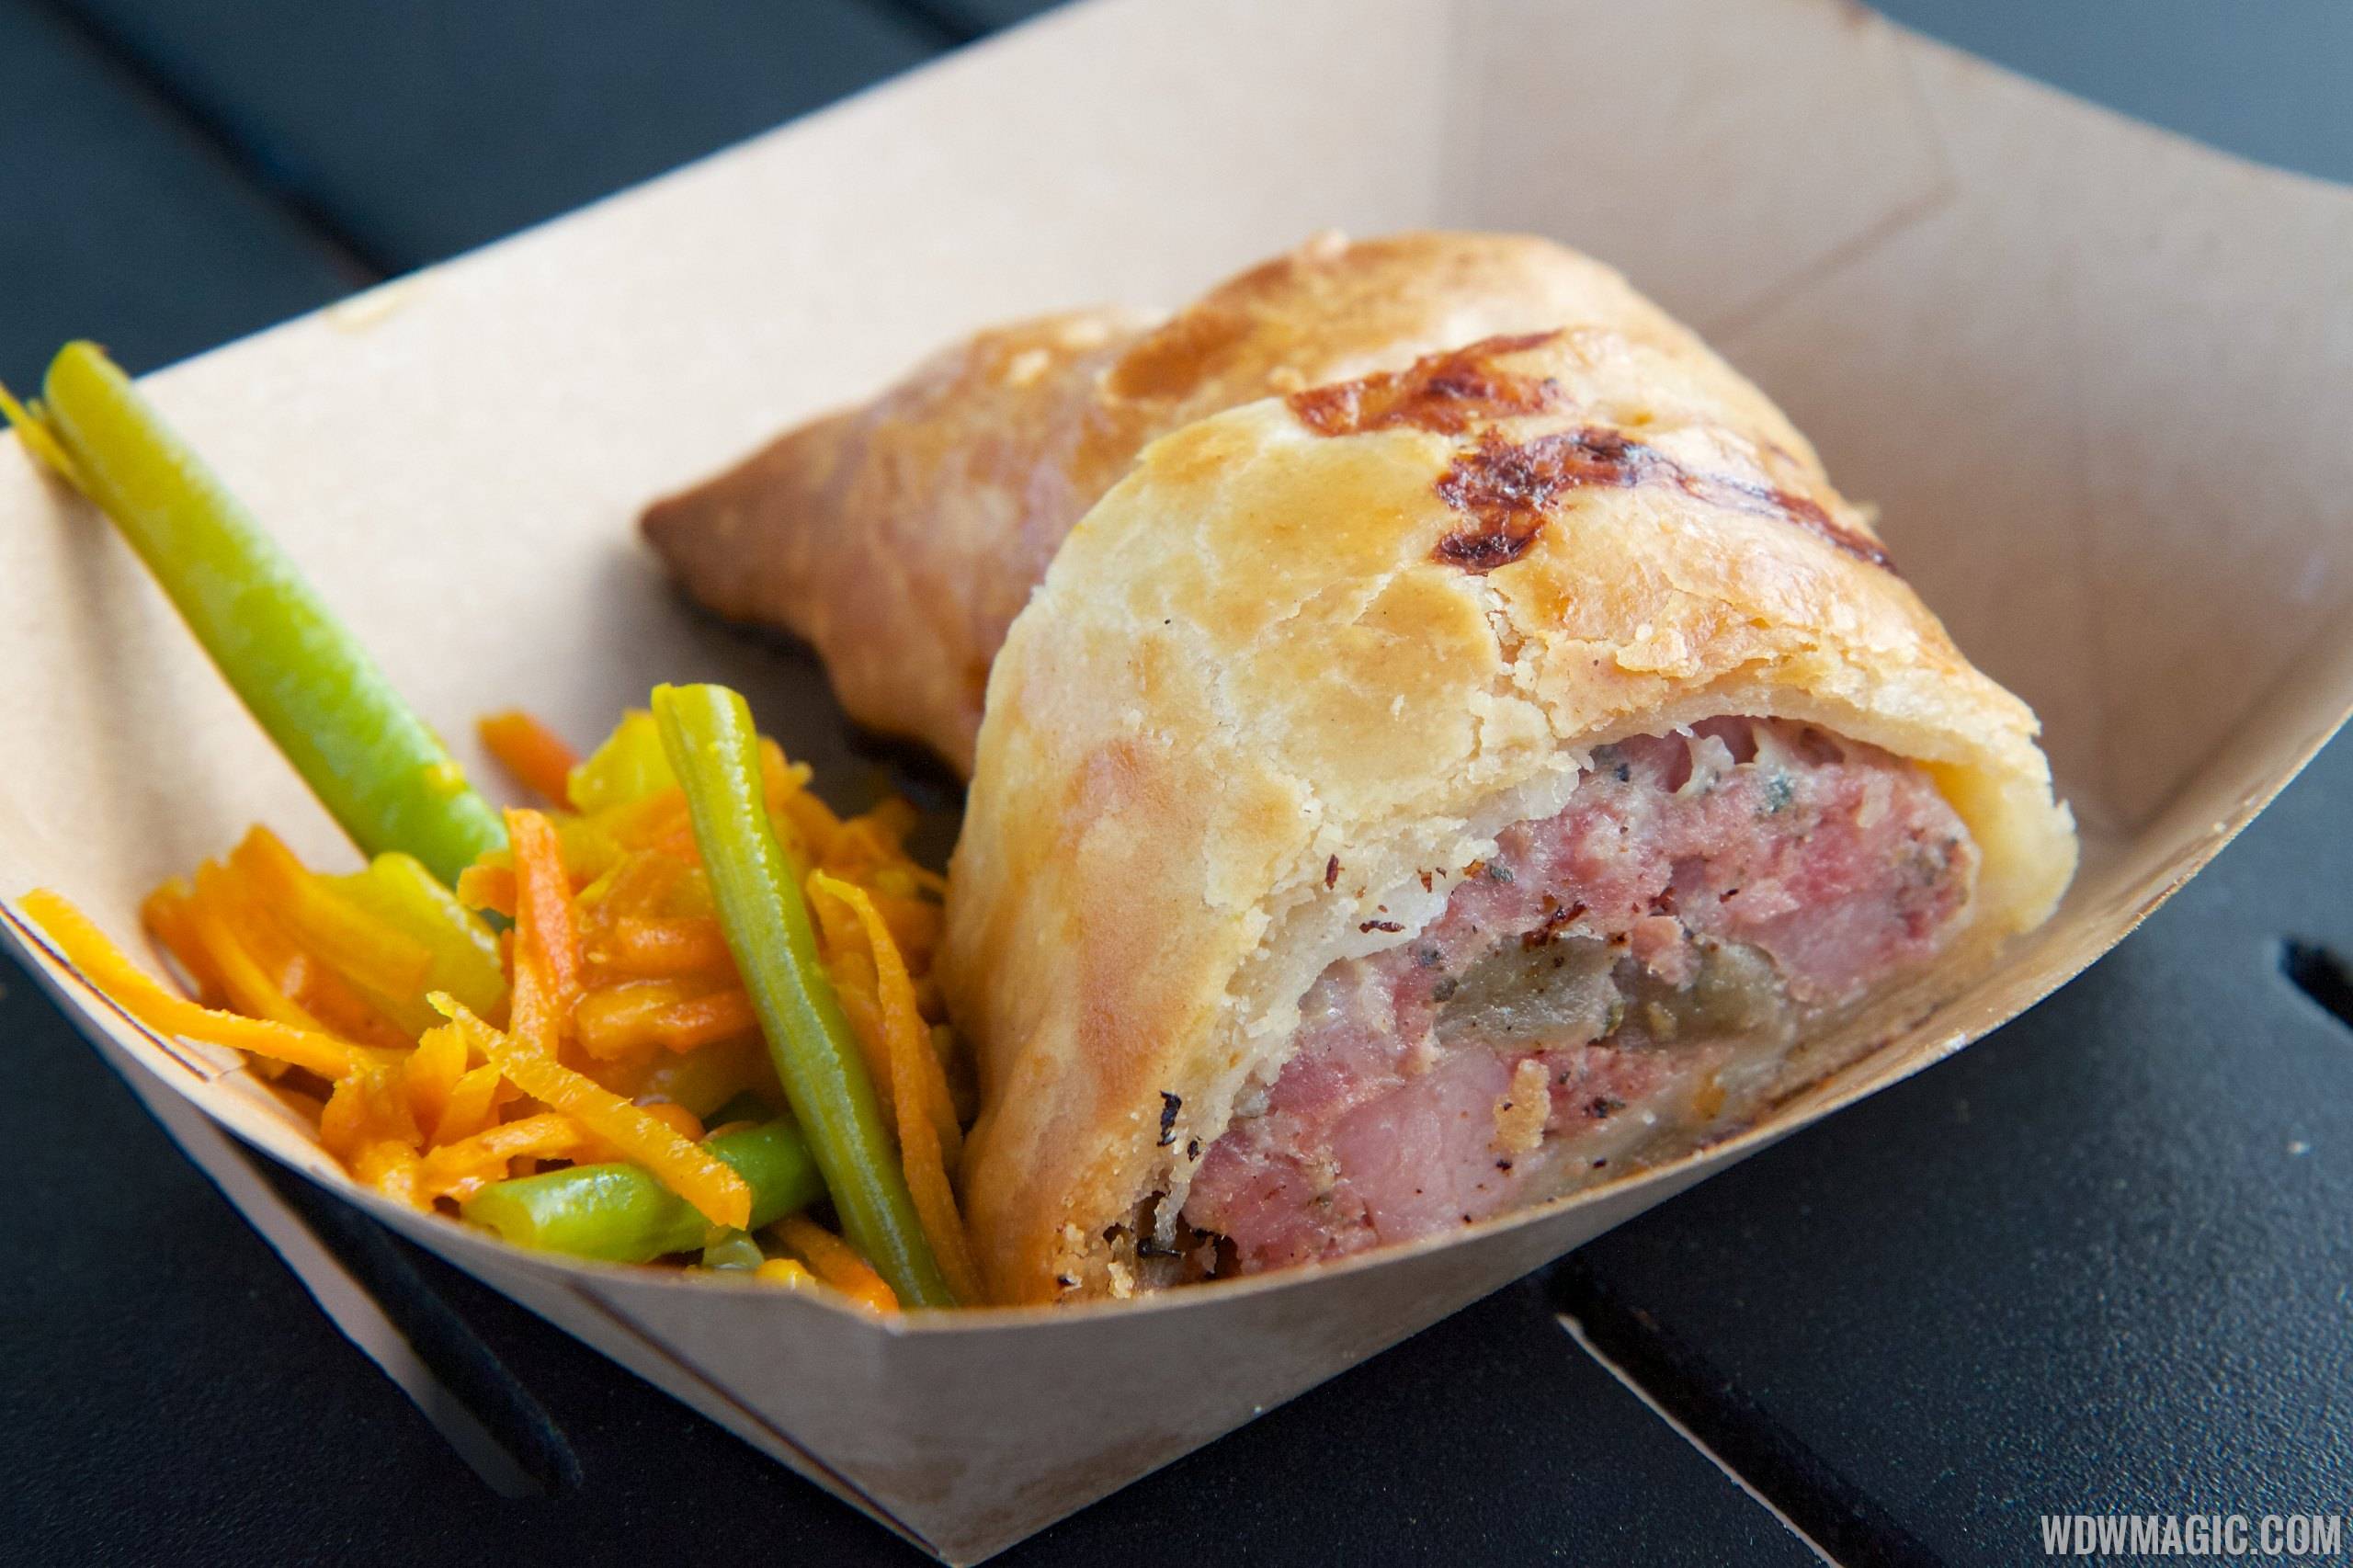 2014 Epcot Flower and Garden Festival Outdoor Kitchen kiosk - Buttercup Cottage UK - Pork and Apple Sausage Roll $4.00